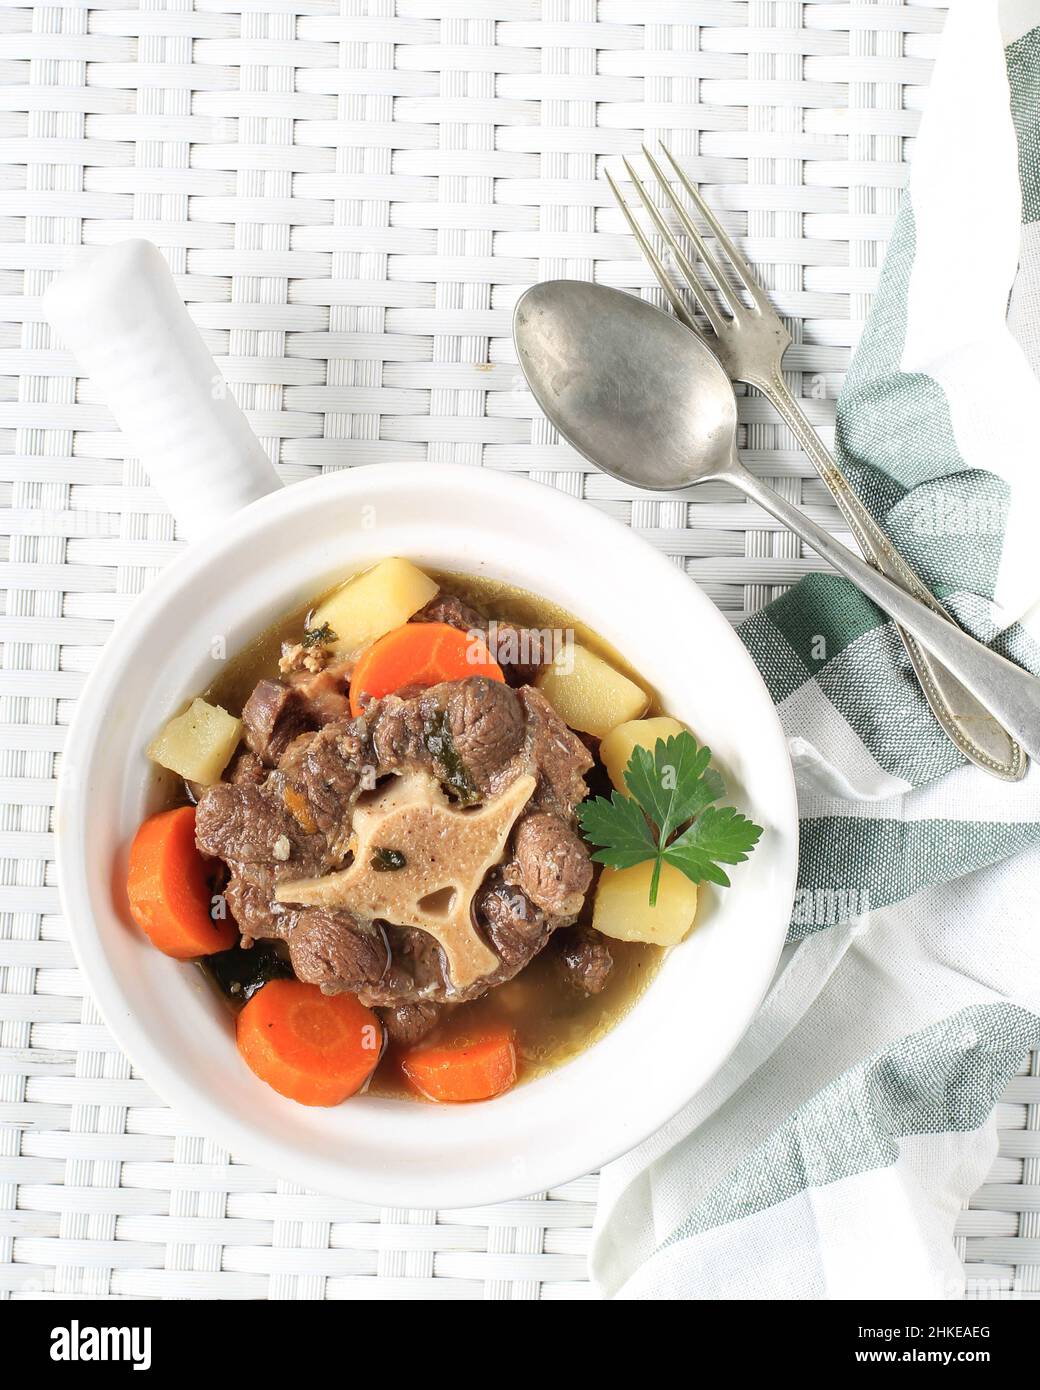 Sop Buntut or Oxtail Soup Served in White Bowl on White Woven Table. Top View Stock Photo